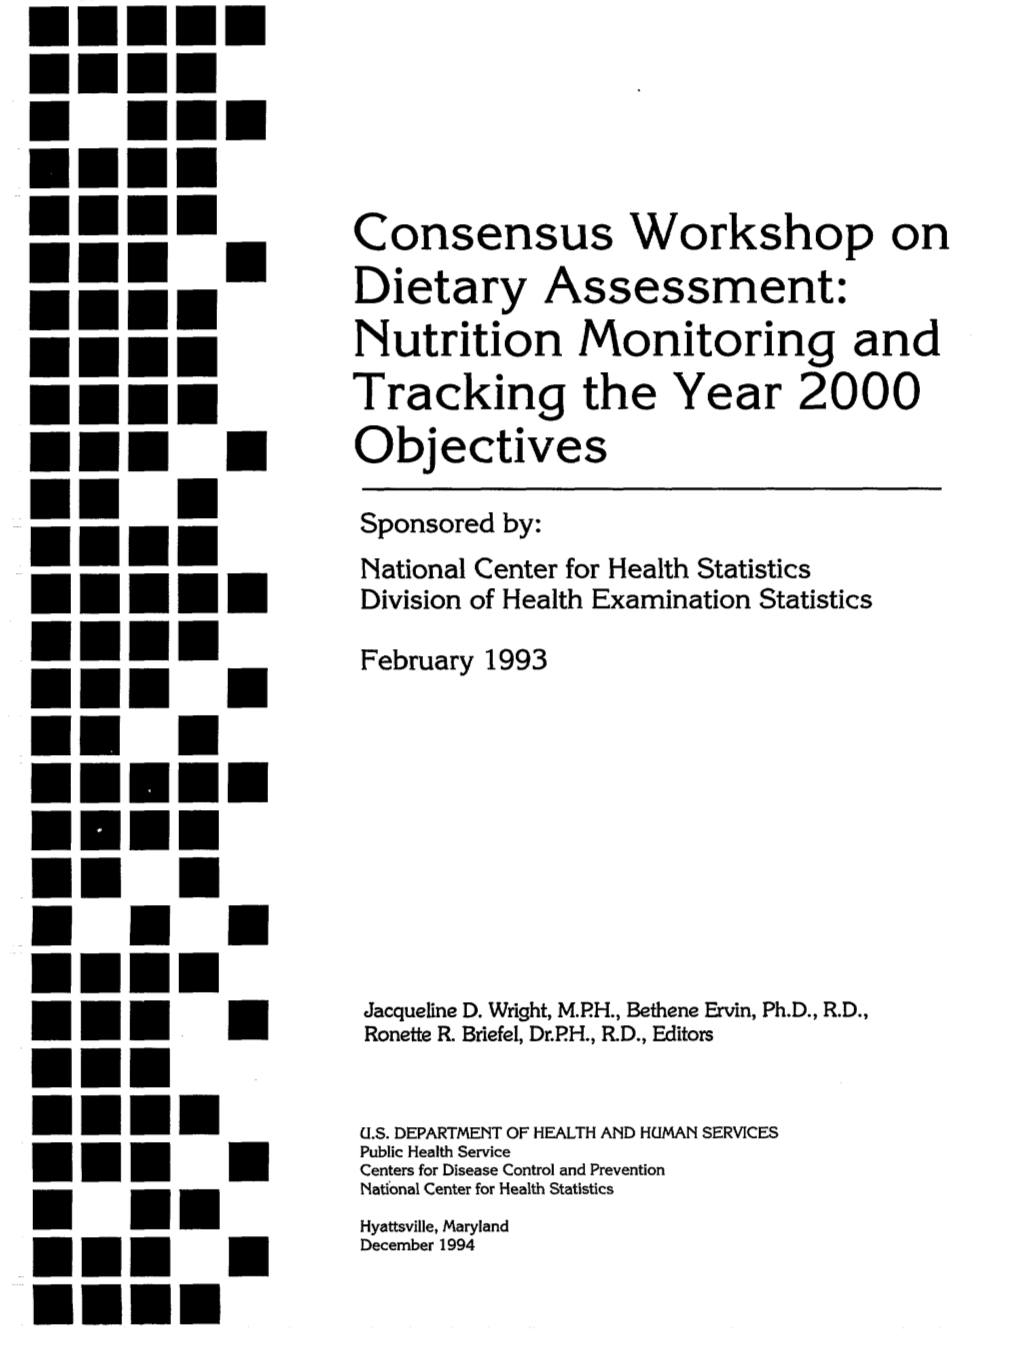 Consensus Workshop on Dietary Assessment: Nutrition Monitoring and Tracking the Year 2000 Objectives